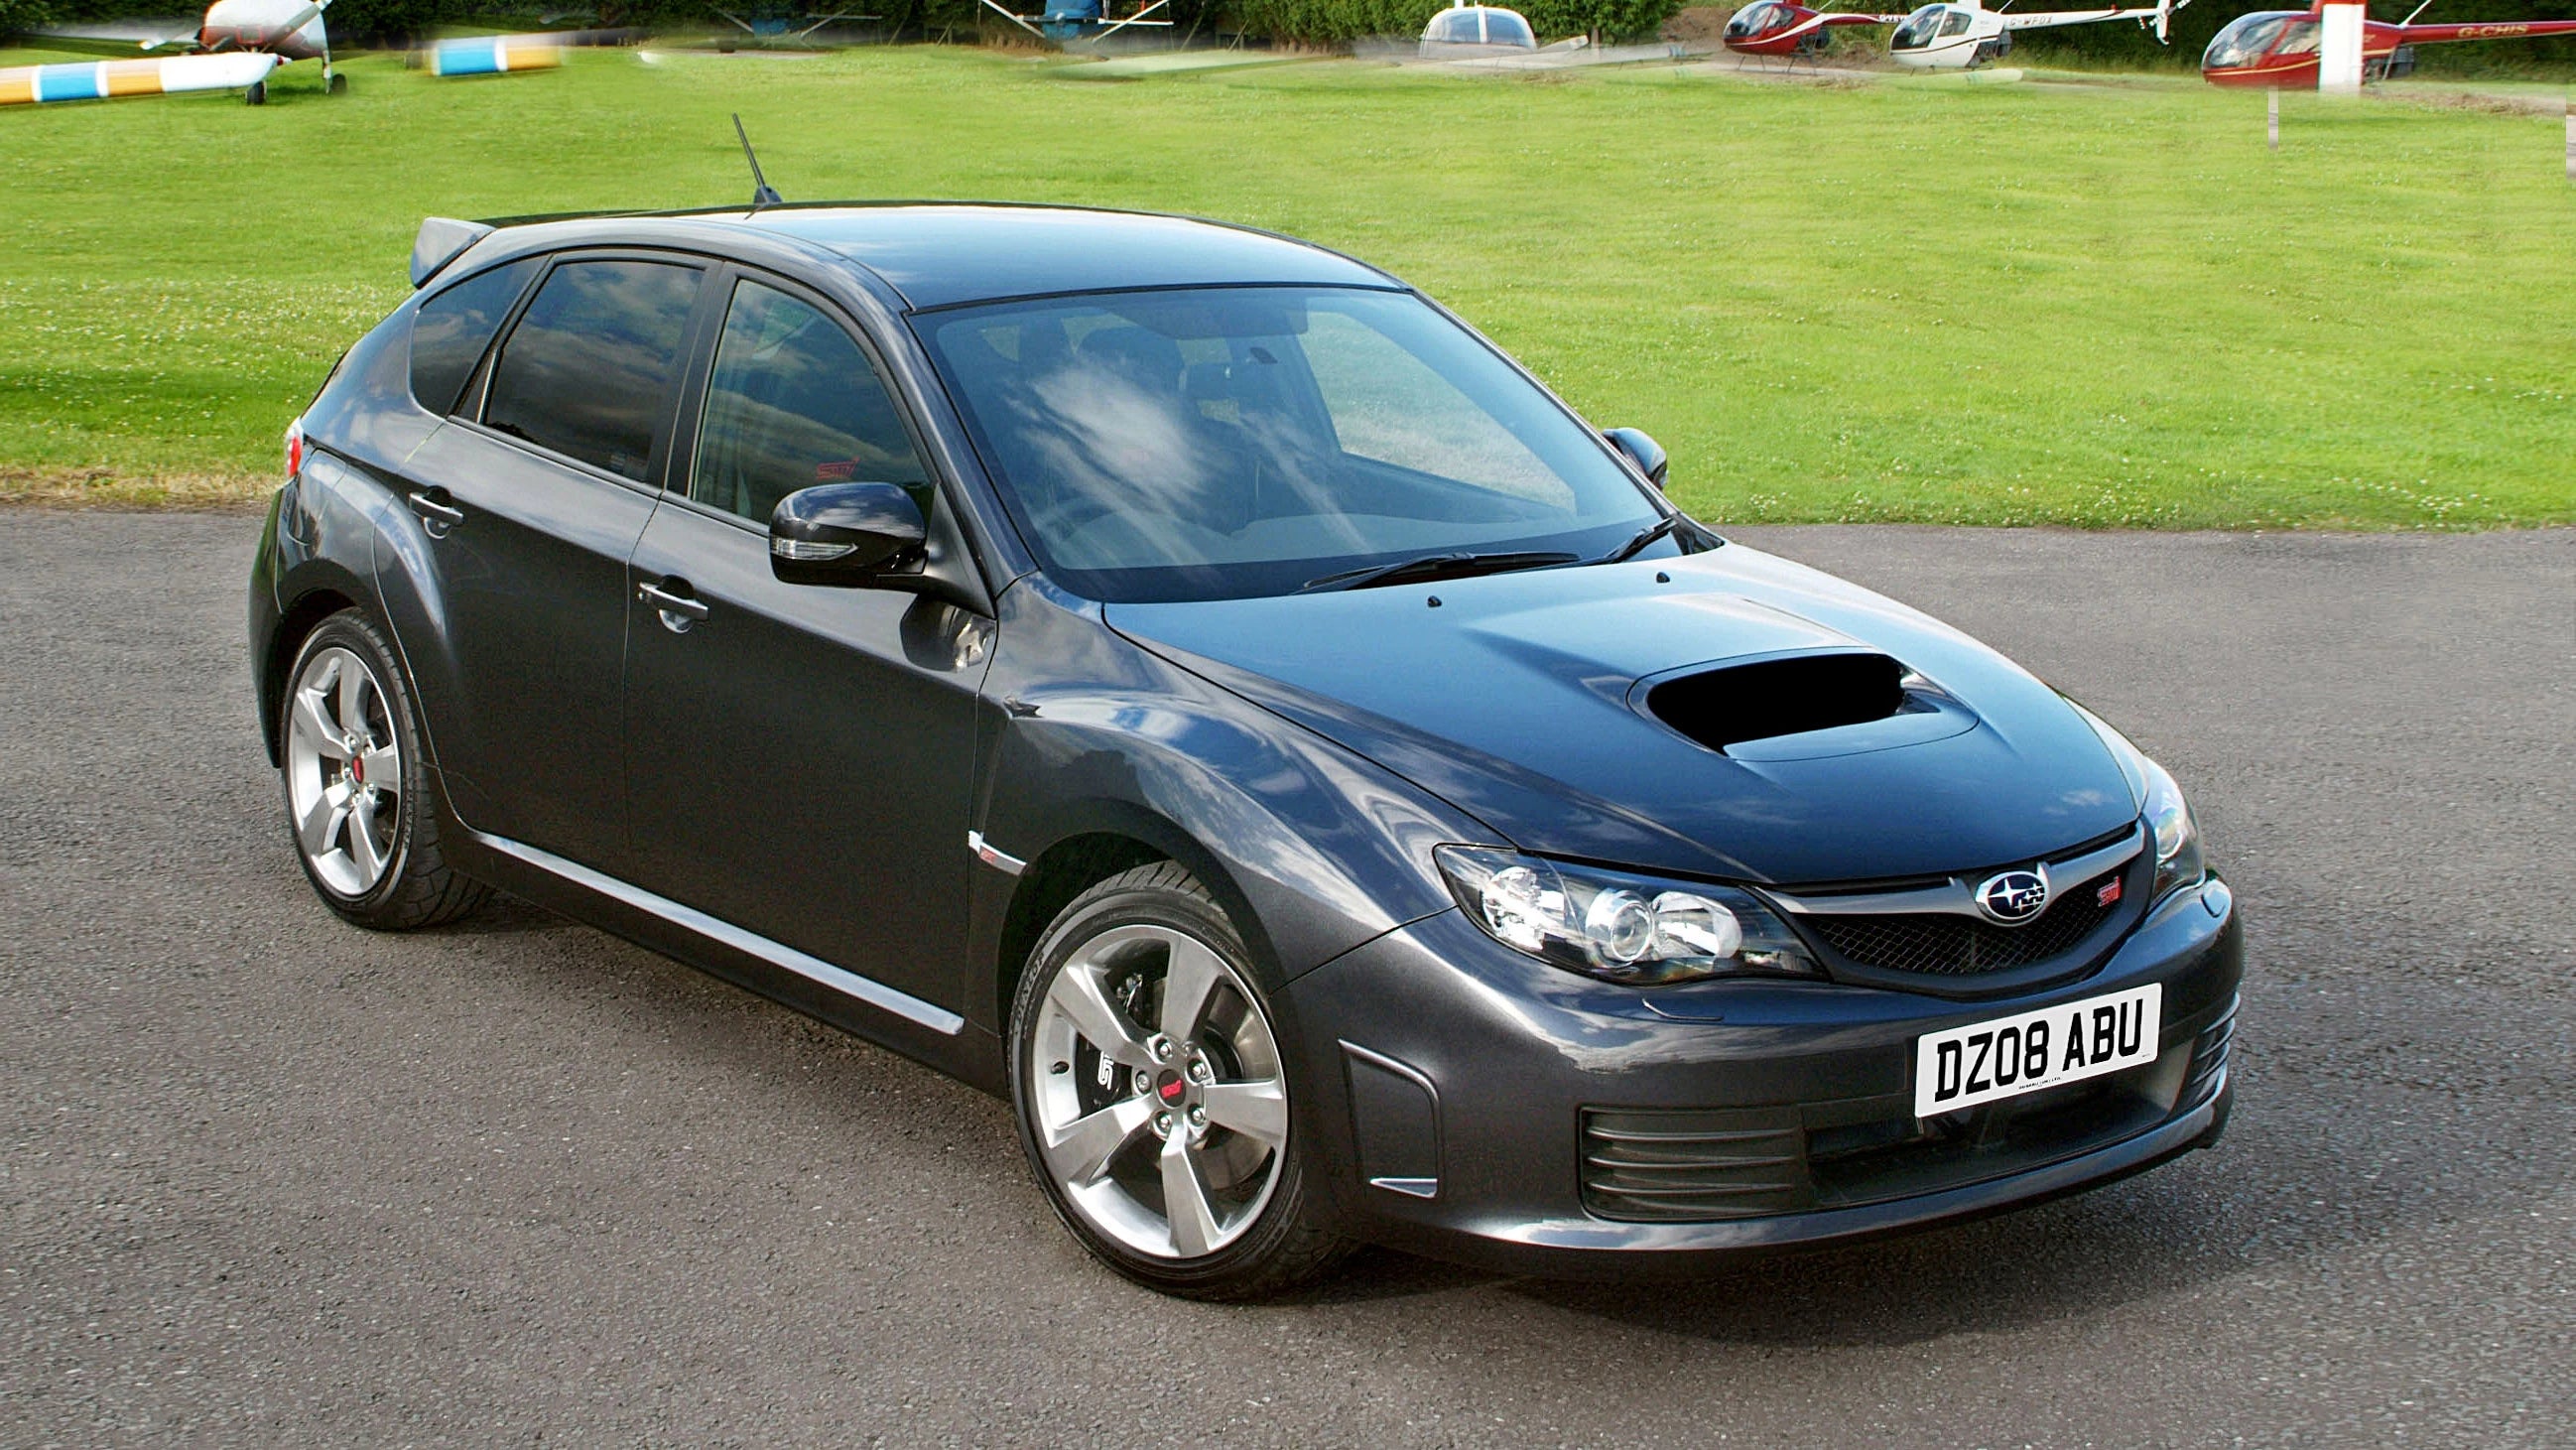 Subaru Impreza Performance Parts | Shop Aftermarket and OEM parts | Get the the best deals here!